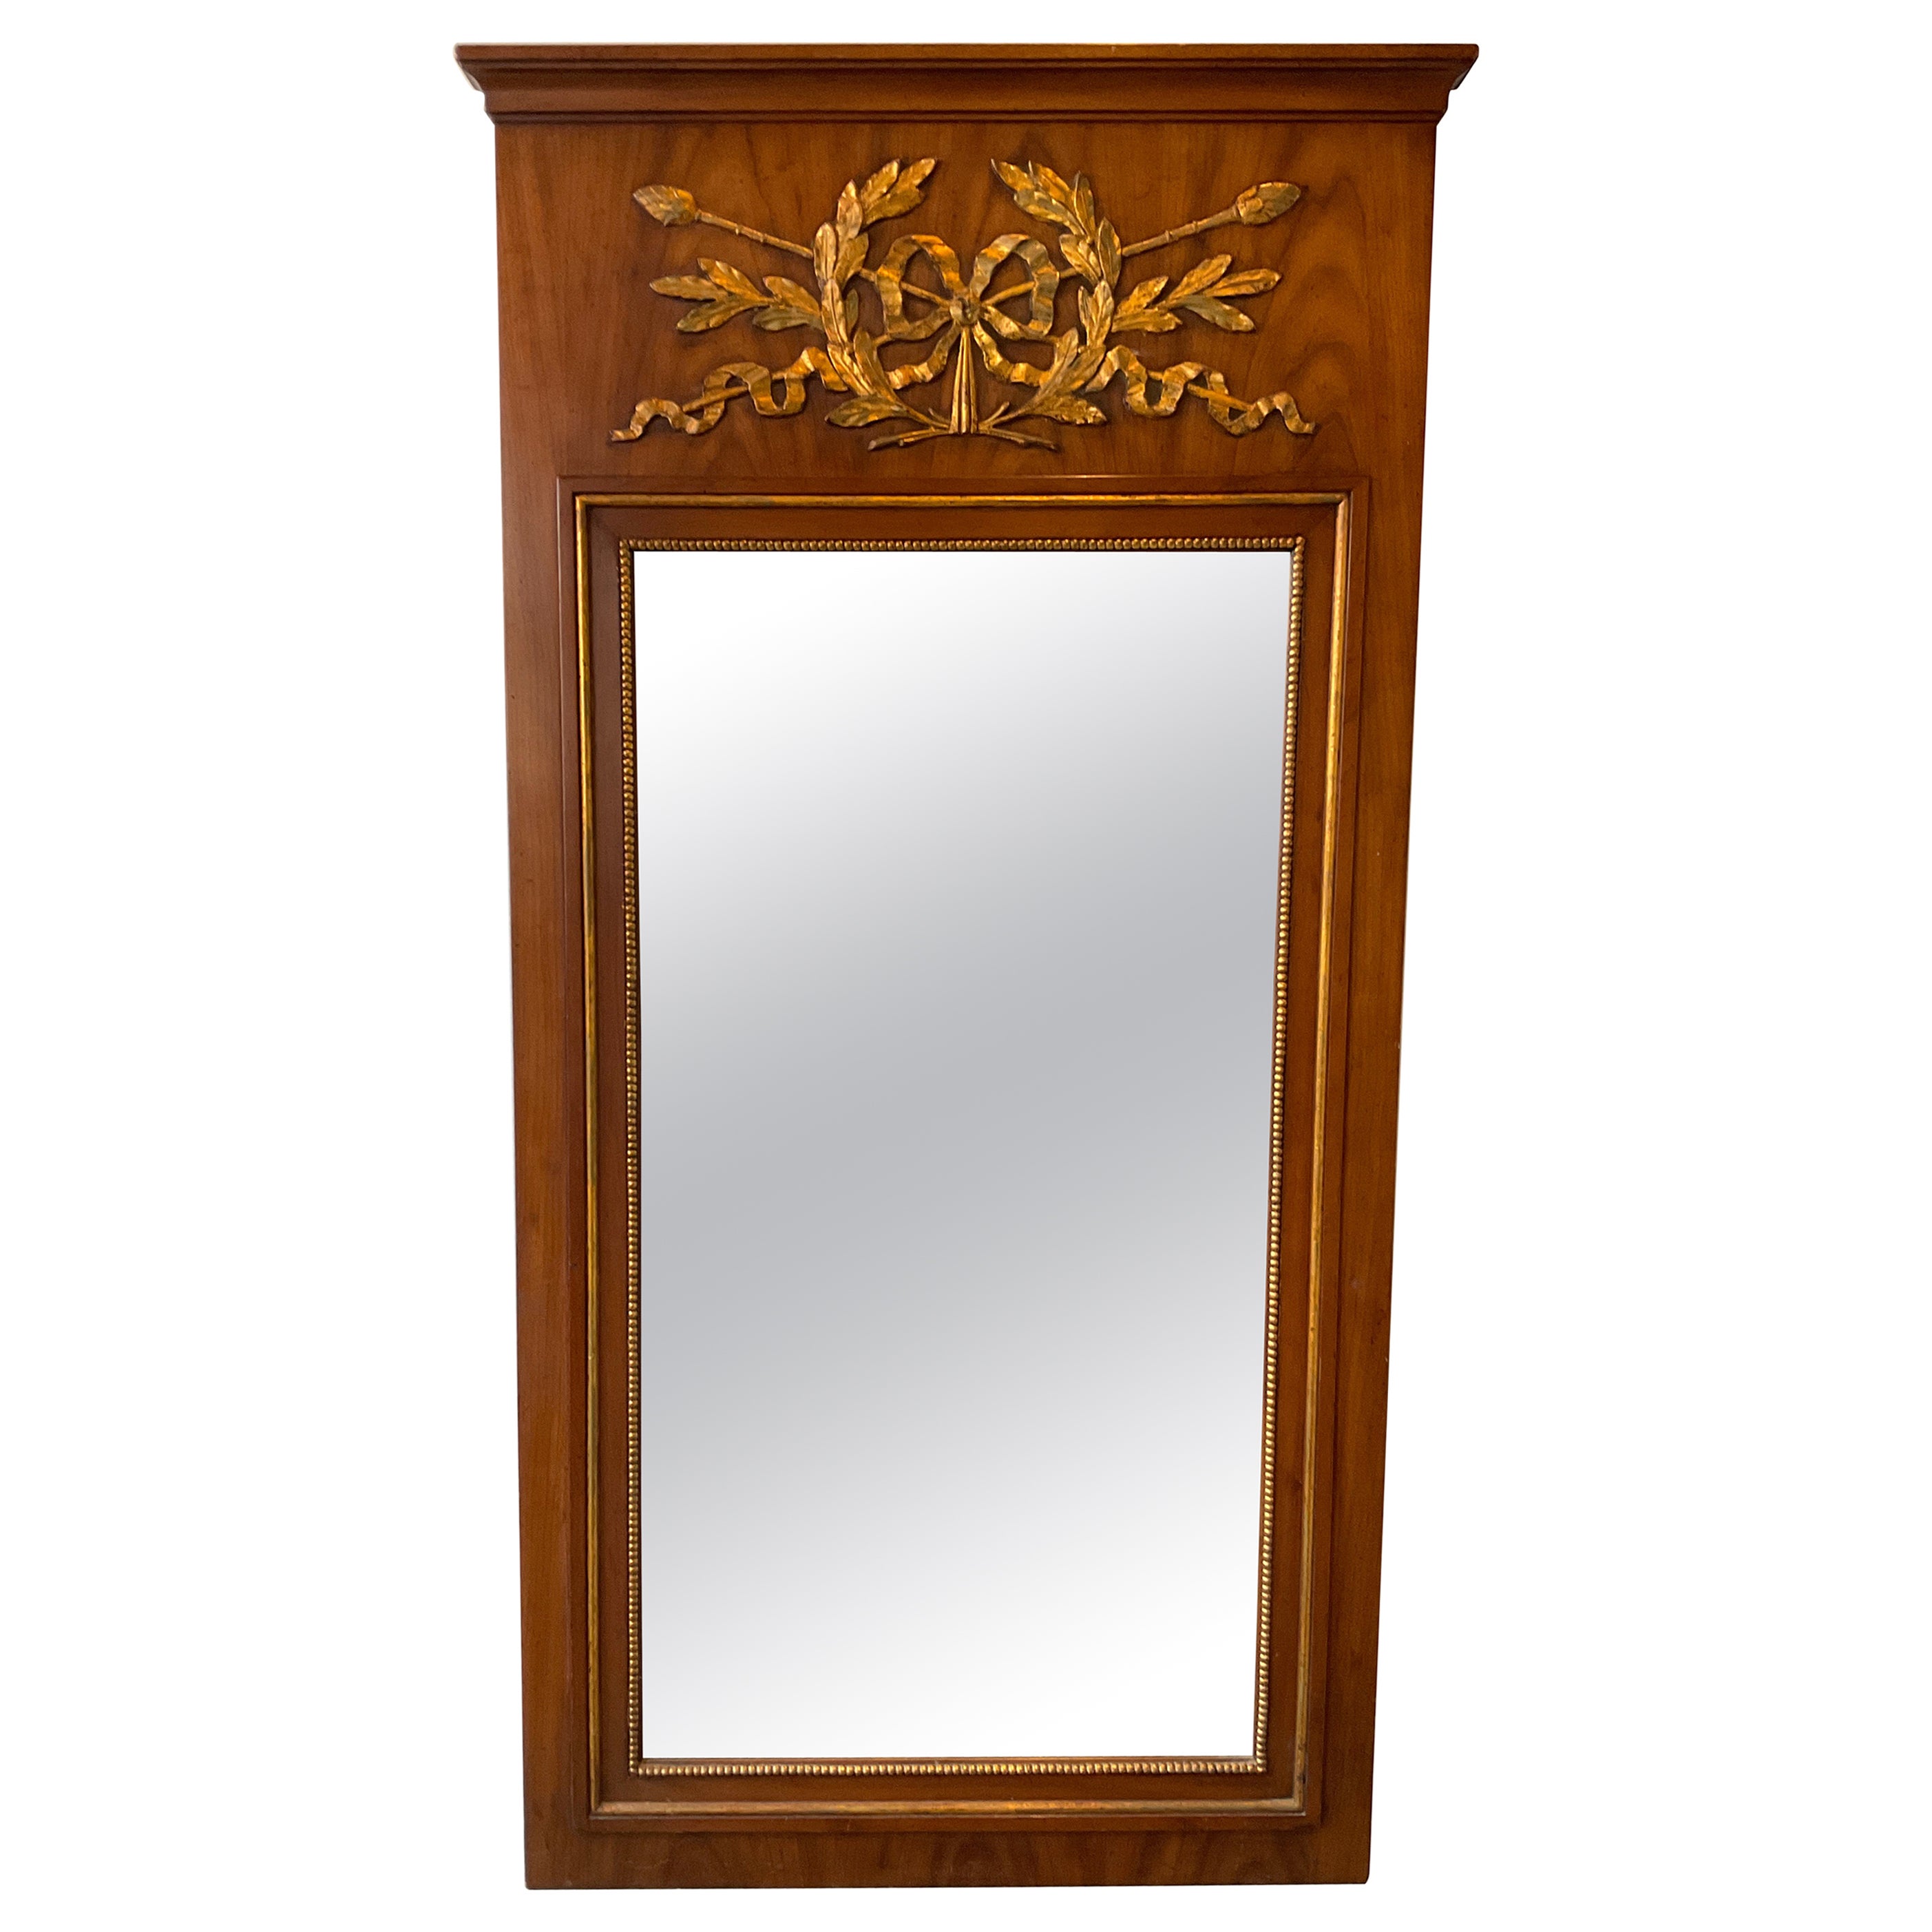 1960s, Wood Trumeau Mirror with Gilt Accents